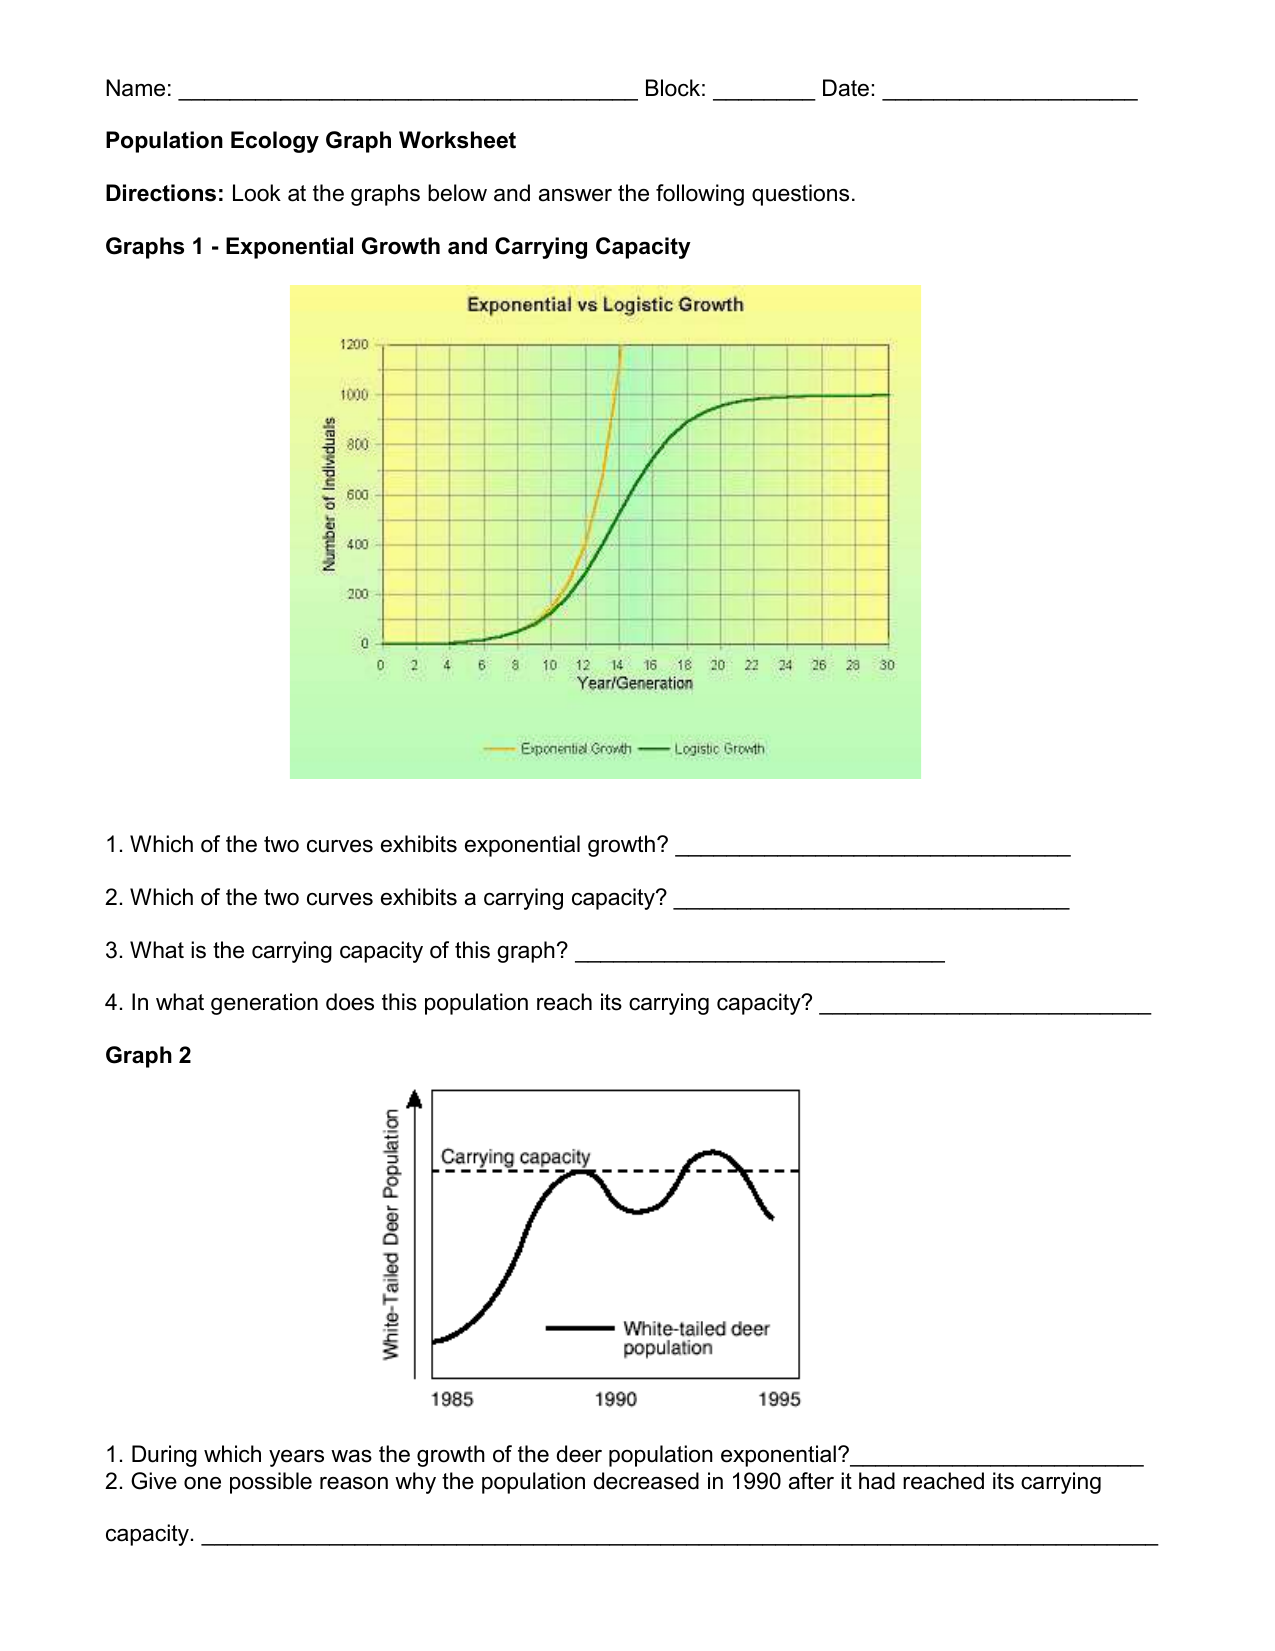 Population Ecology Graph Worksheet With Population Ecology Graph Worksheet